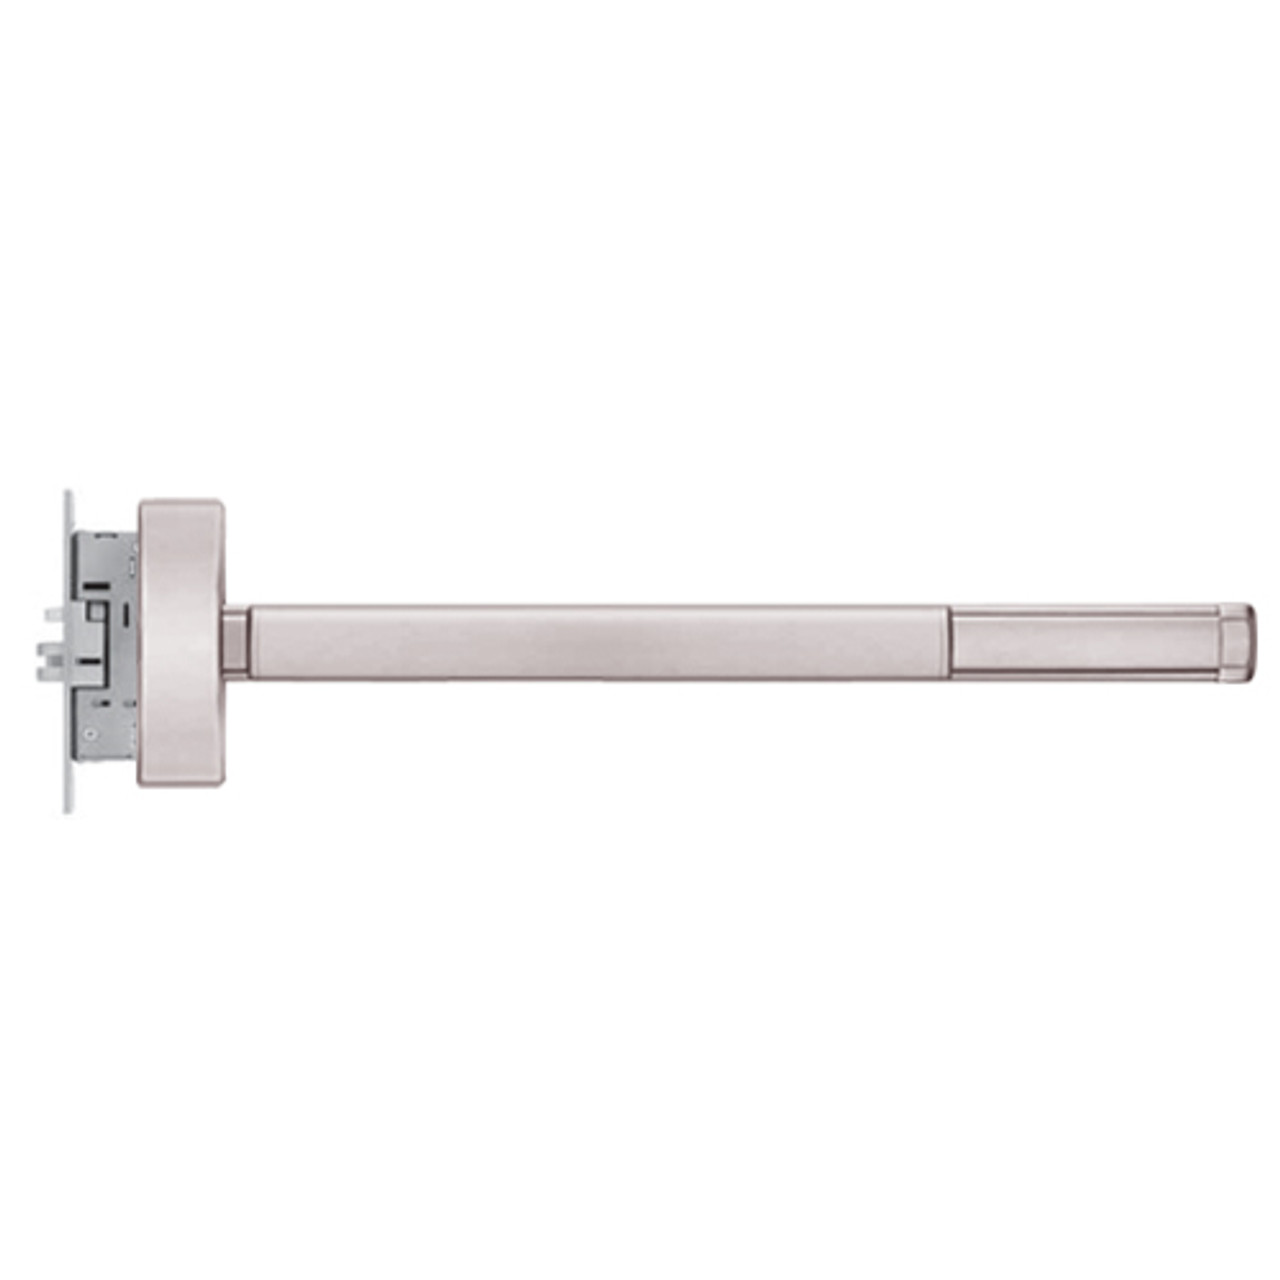 DEFL2305-LHR-628-36 PHI 2300 Series Fire Rated Apex Mortise Exit Device with Delayed Egress Prepped for Key Controls Thumb Piece in Satin Aluminum Finish